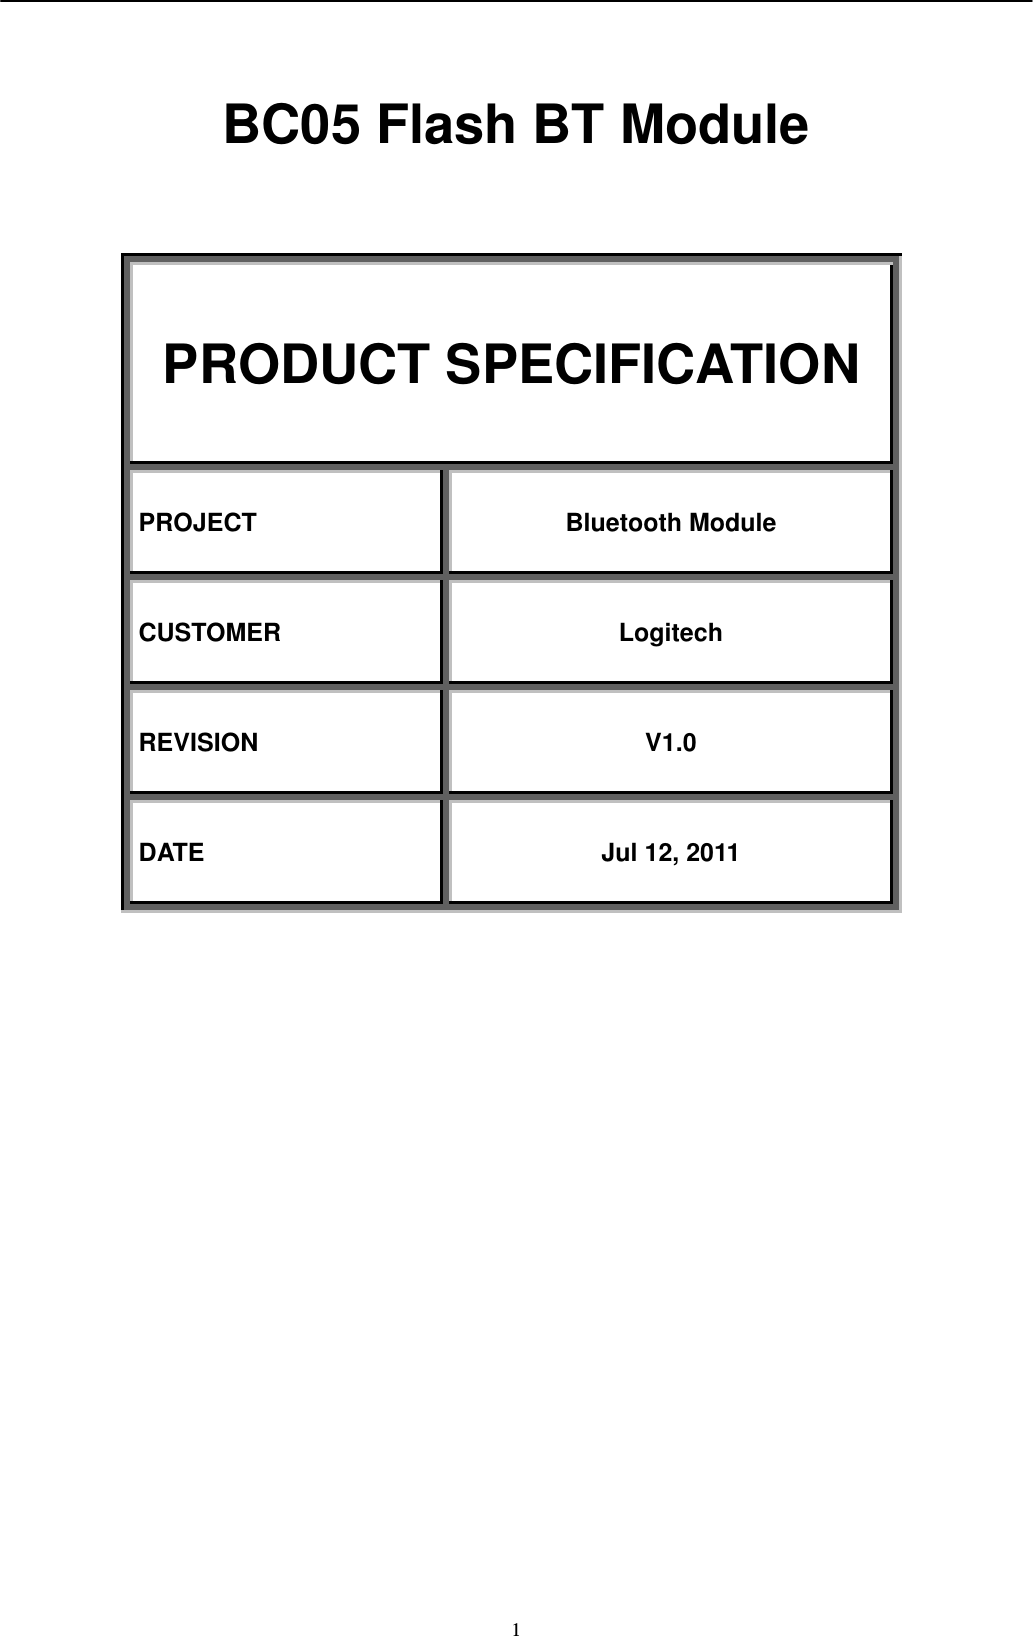                                                                                                   1  BC05 Flash BT Module     PRODUCT SPECIFICATION   PROJECT   Bluetooth Module  CUSTOMER                Logitech  REVISION   V1.0  DATE   Jul 12, 2011     